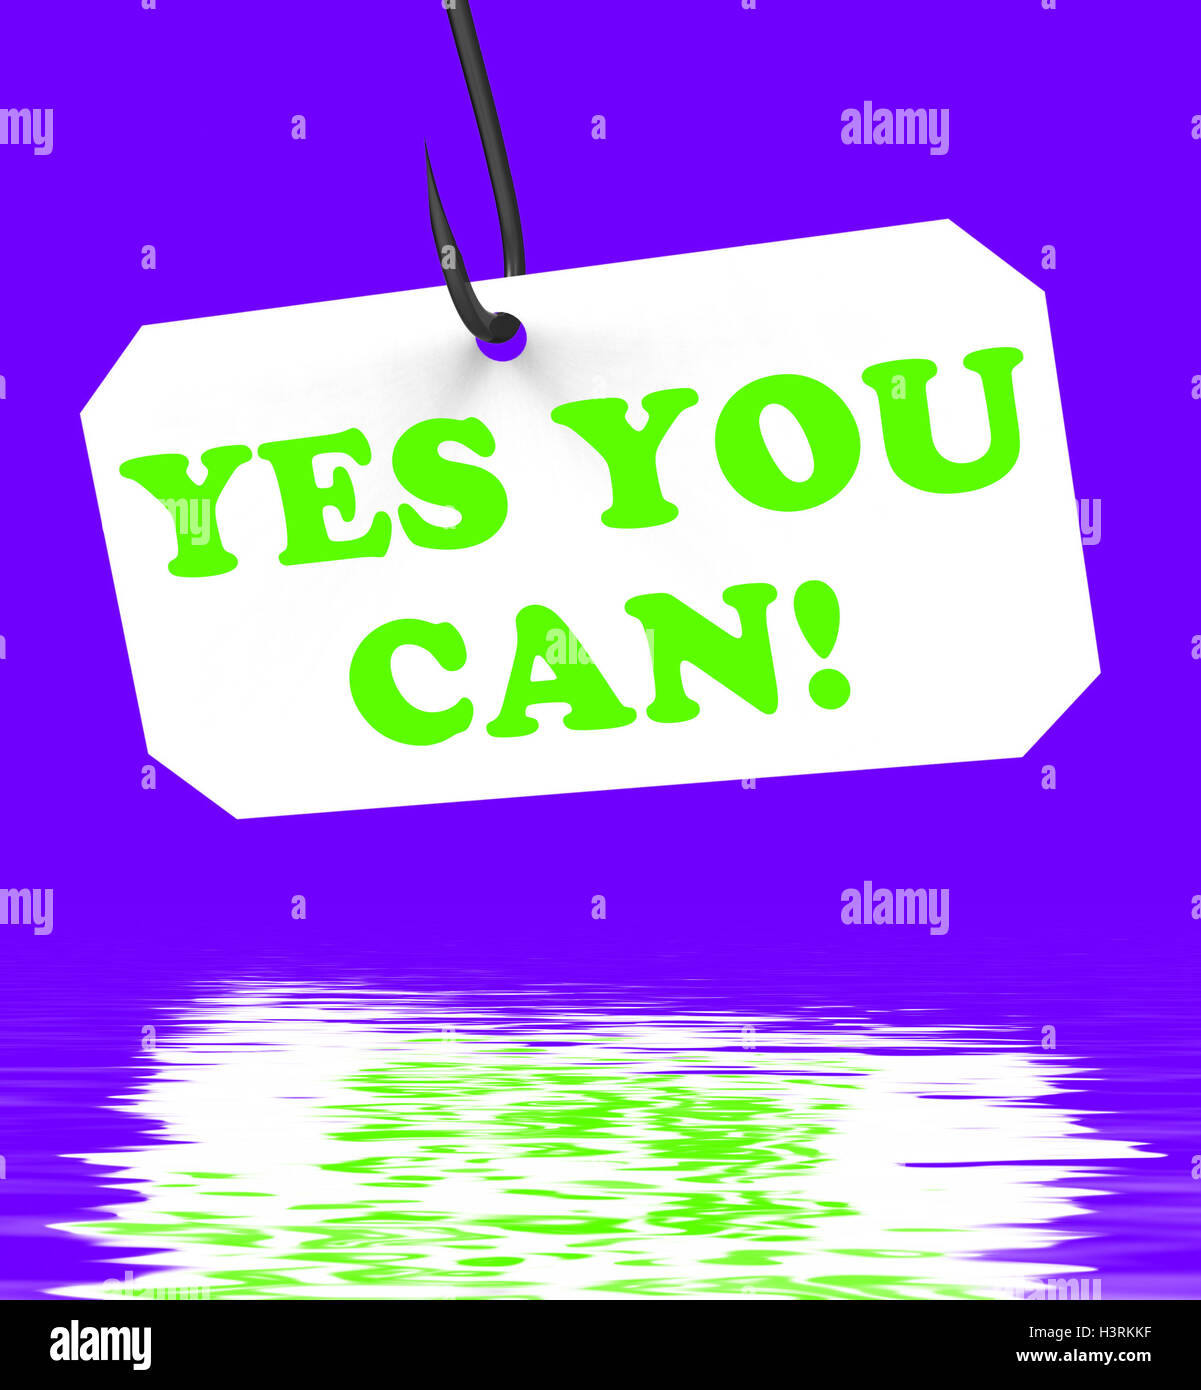 Yes You Can! On Hook Displays Inspiration And Motivation Stock Photo